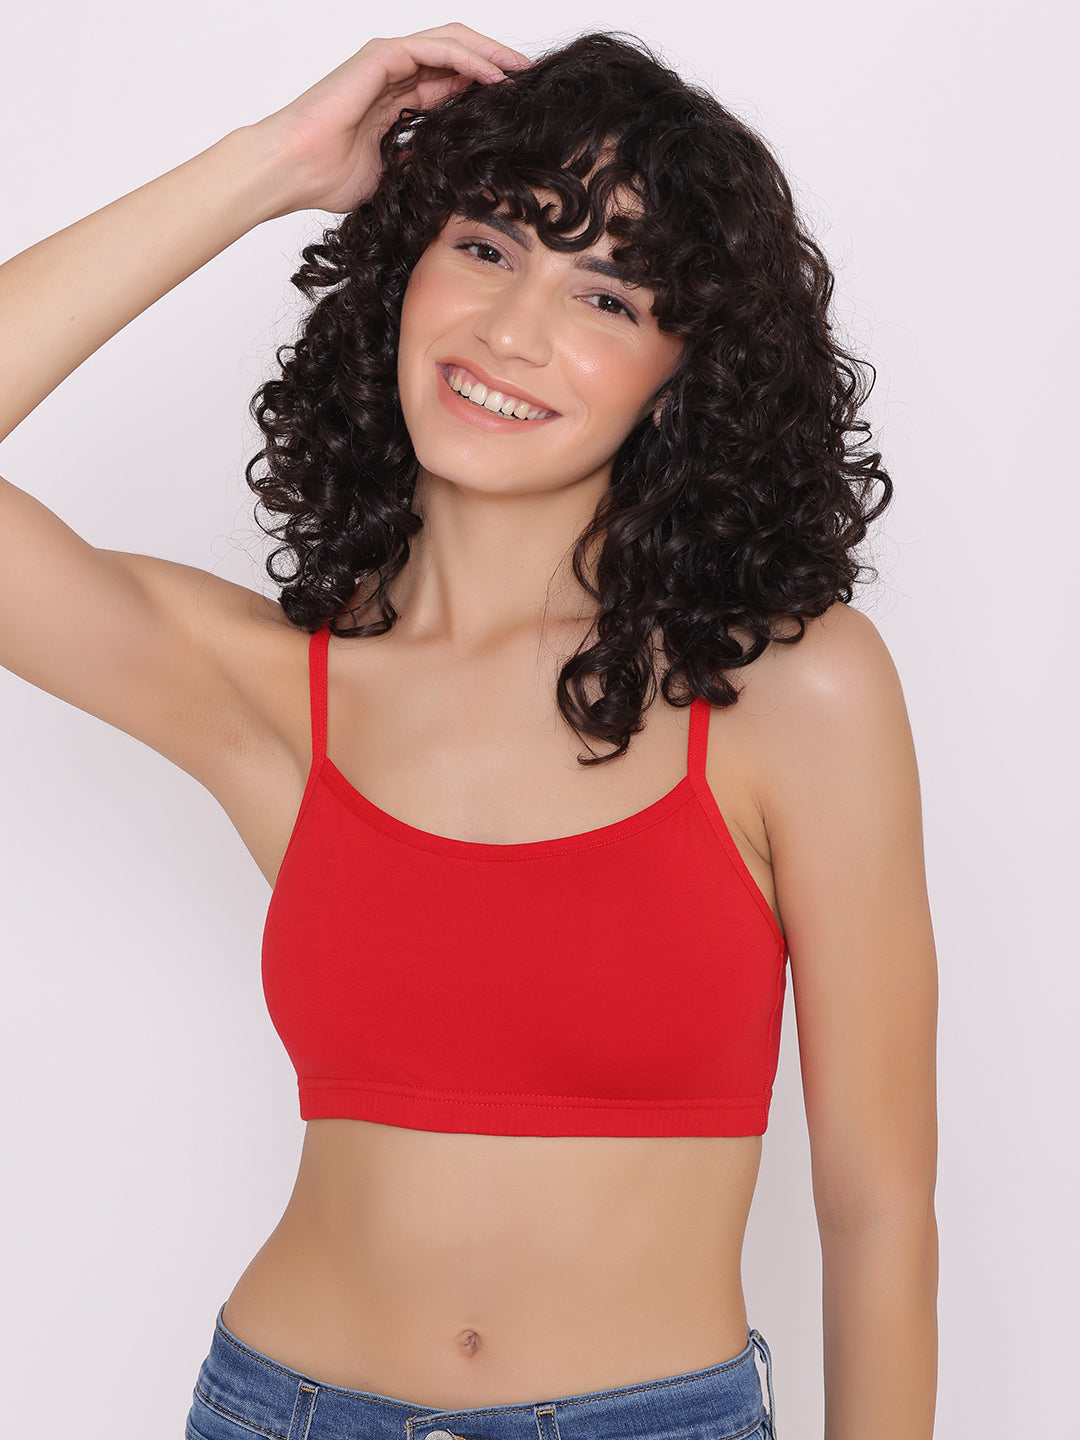 Beginners bra for Girsl's in different sizes and colors, Teenagers